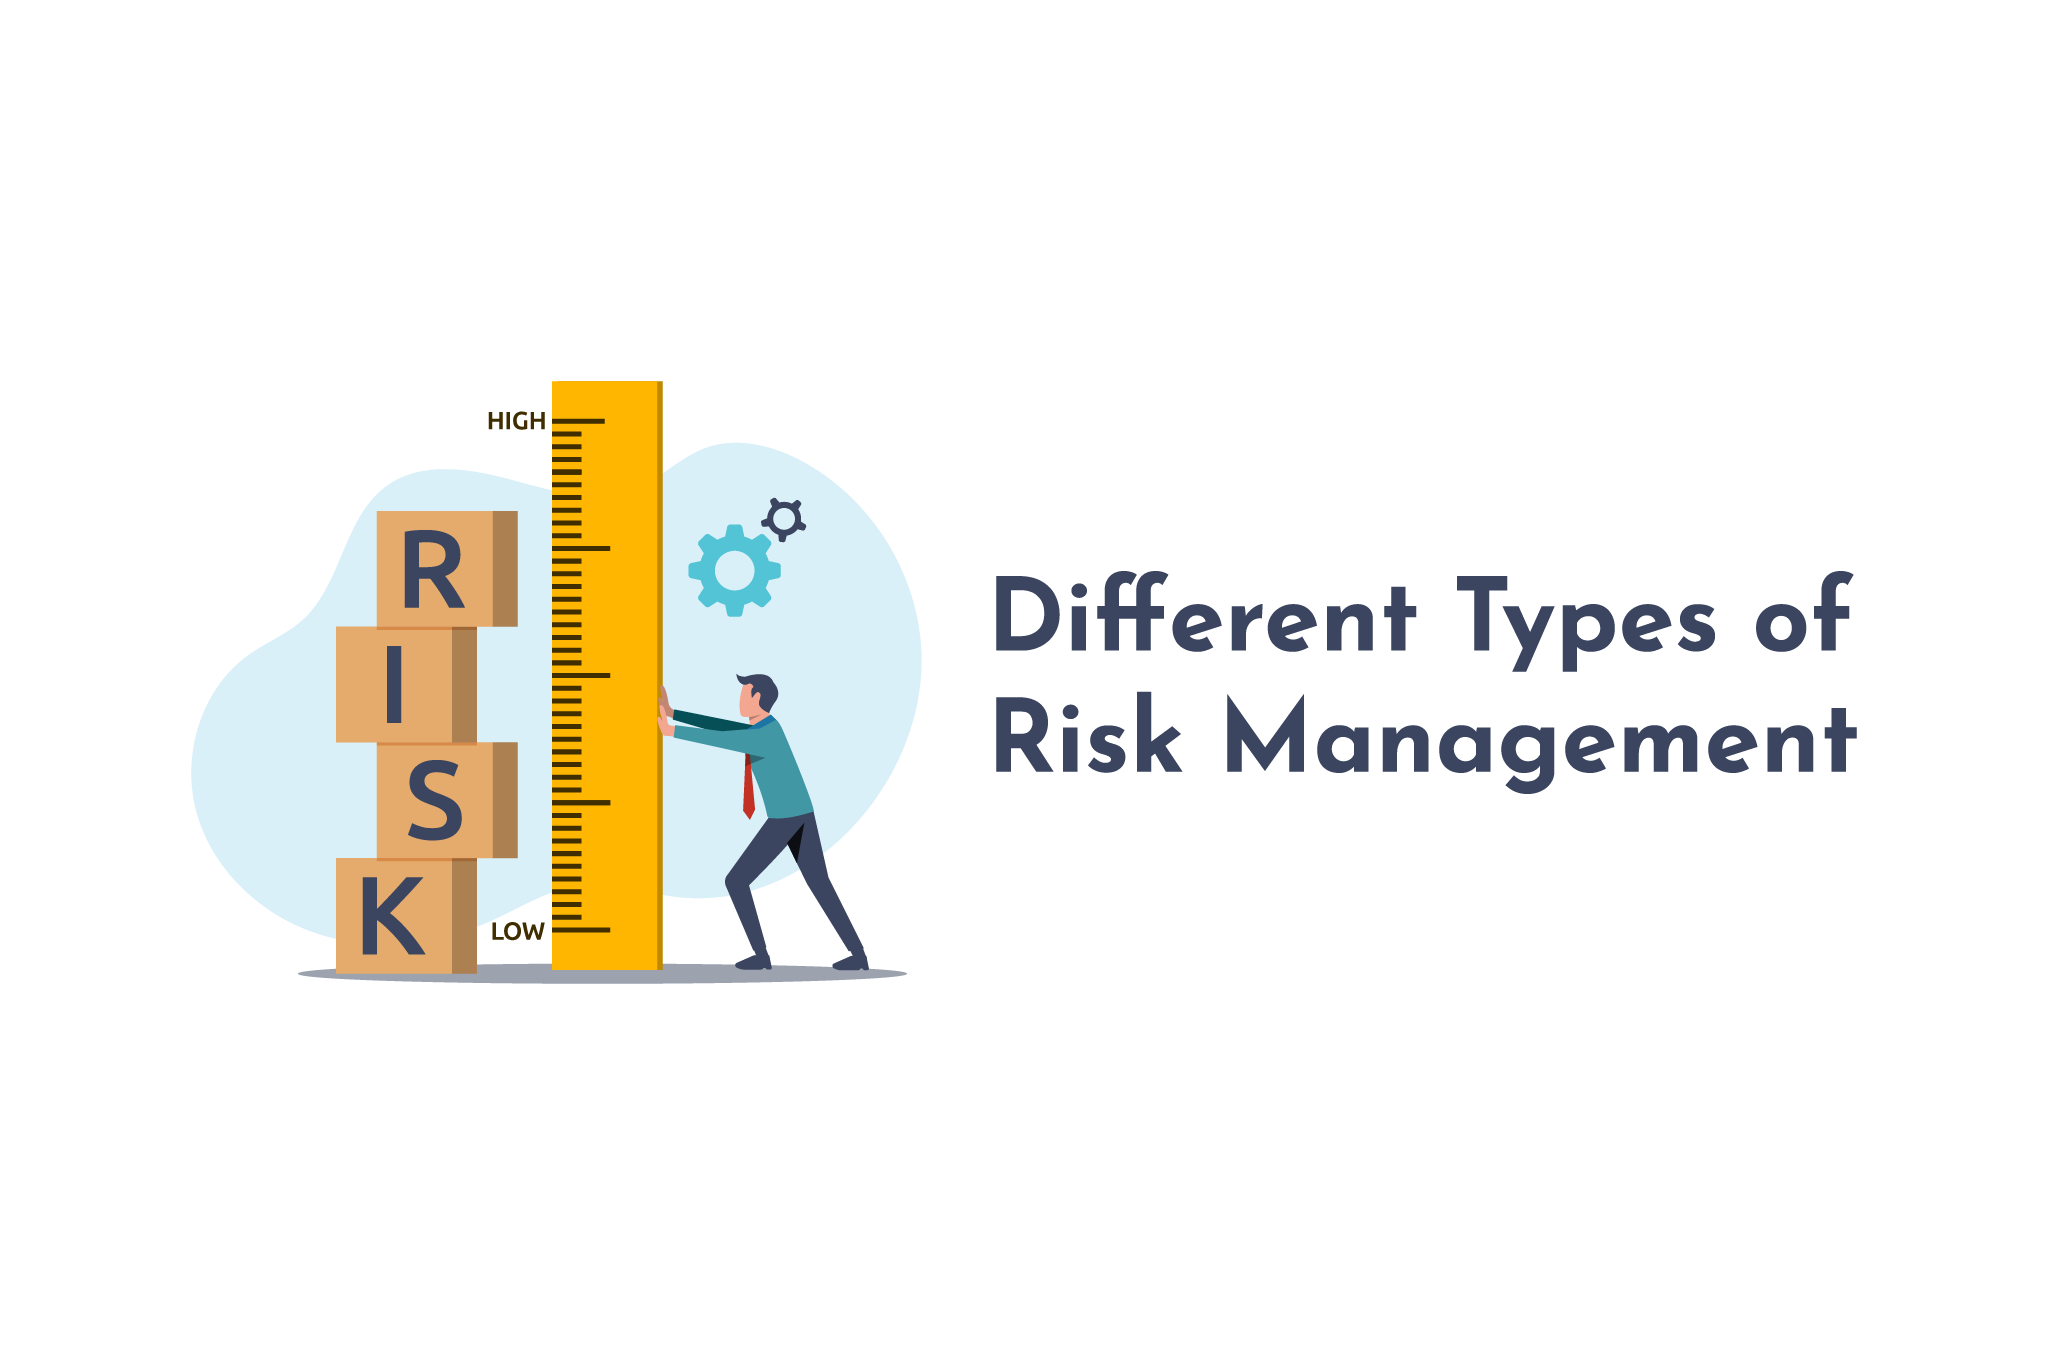 Different Types of Risk Management